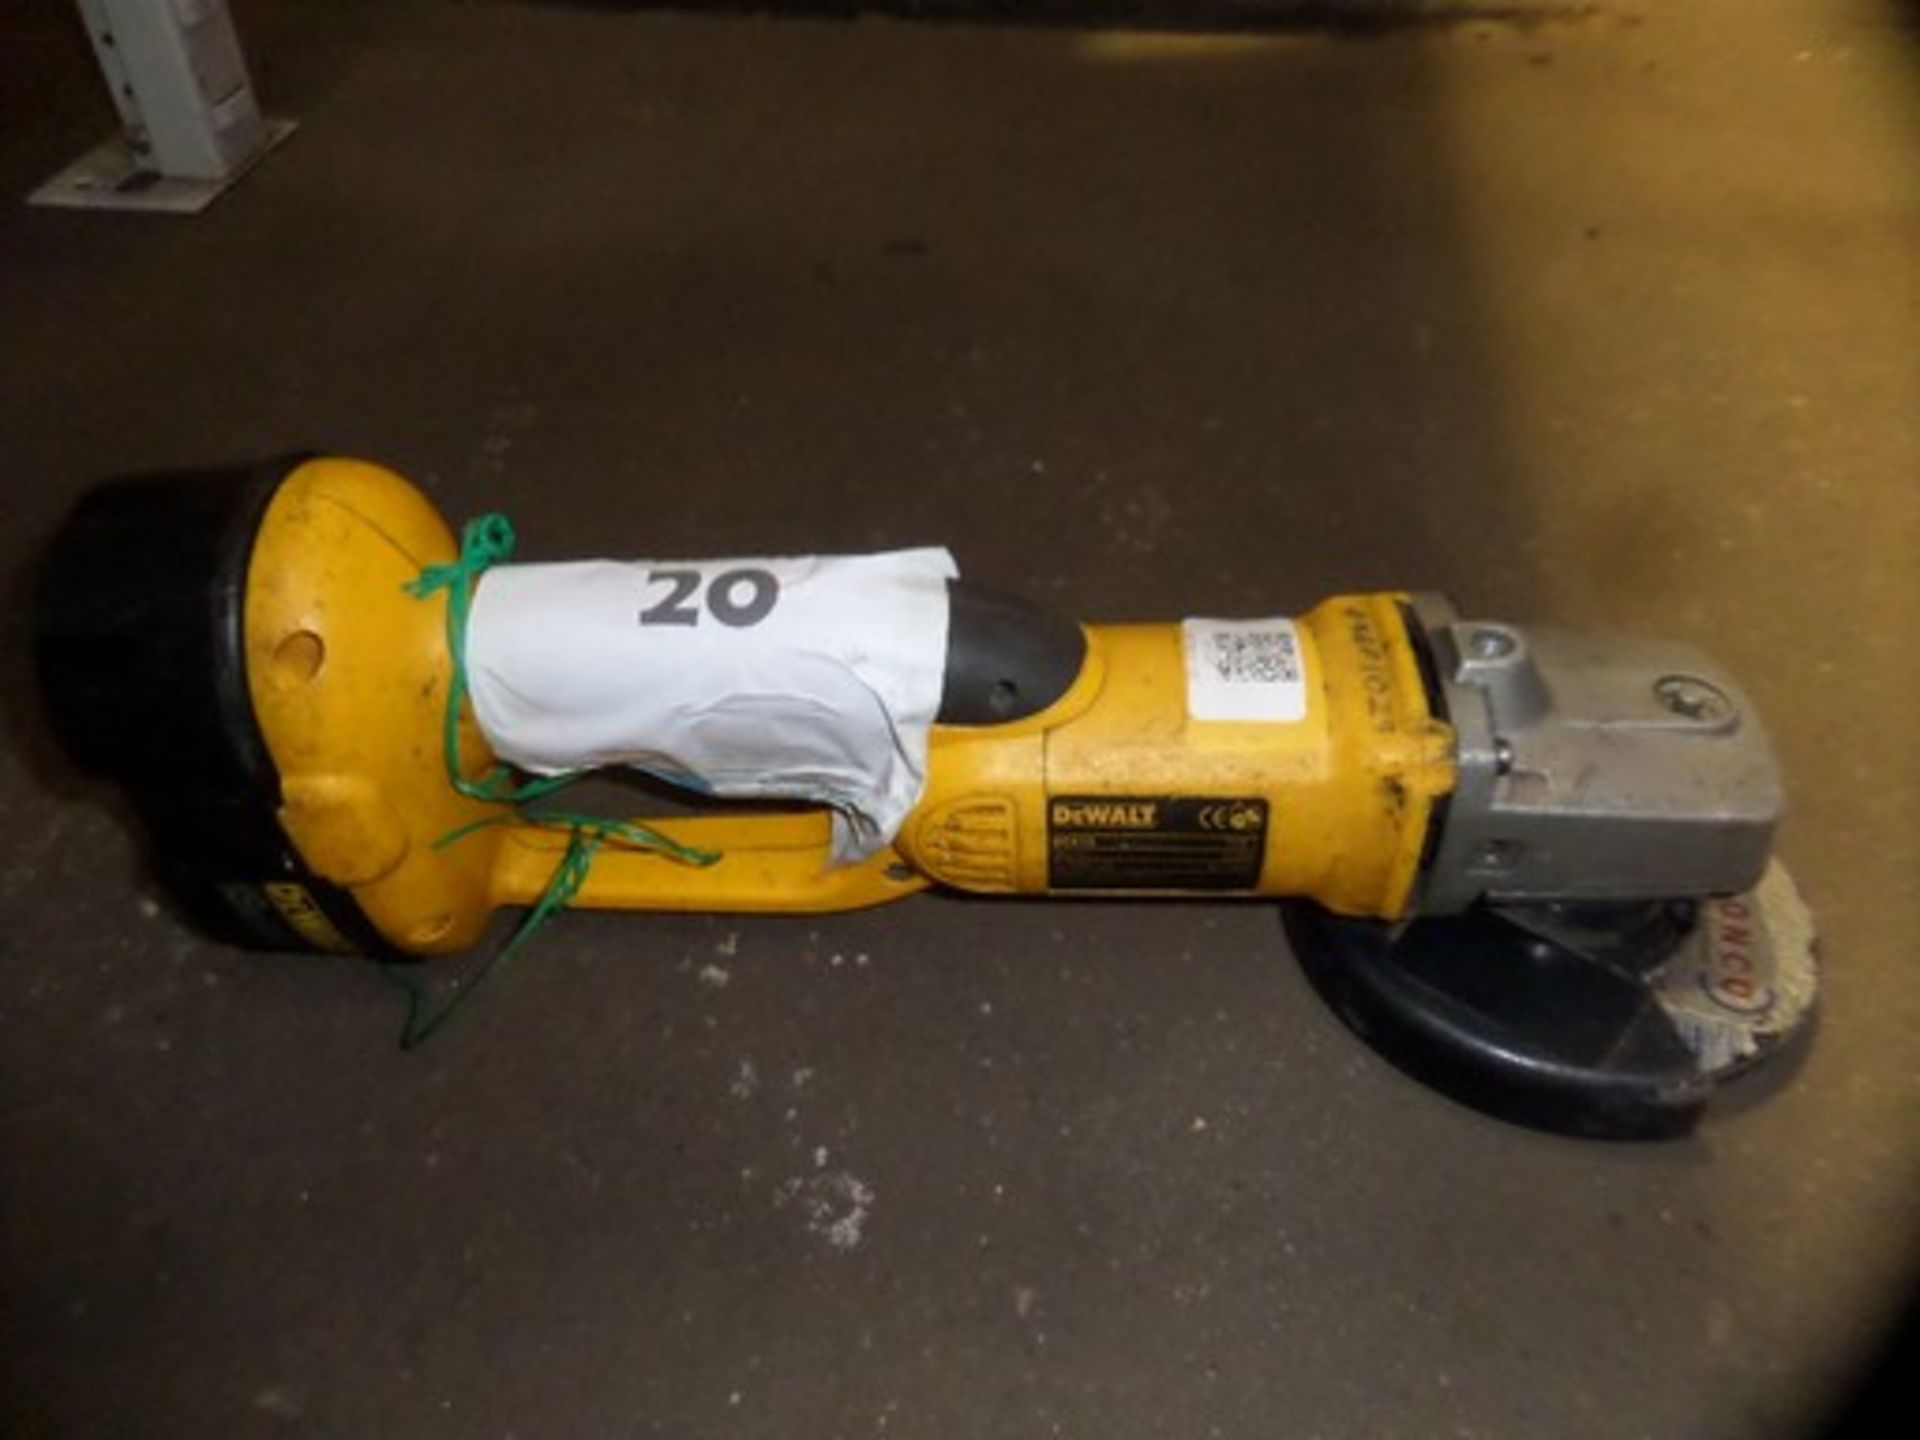 Dewalt DC410 {015307} 18v Cordless Angle Grinder Tested and is working but does require charger.